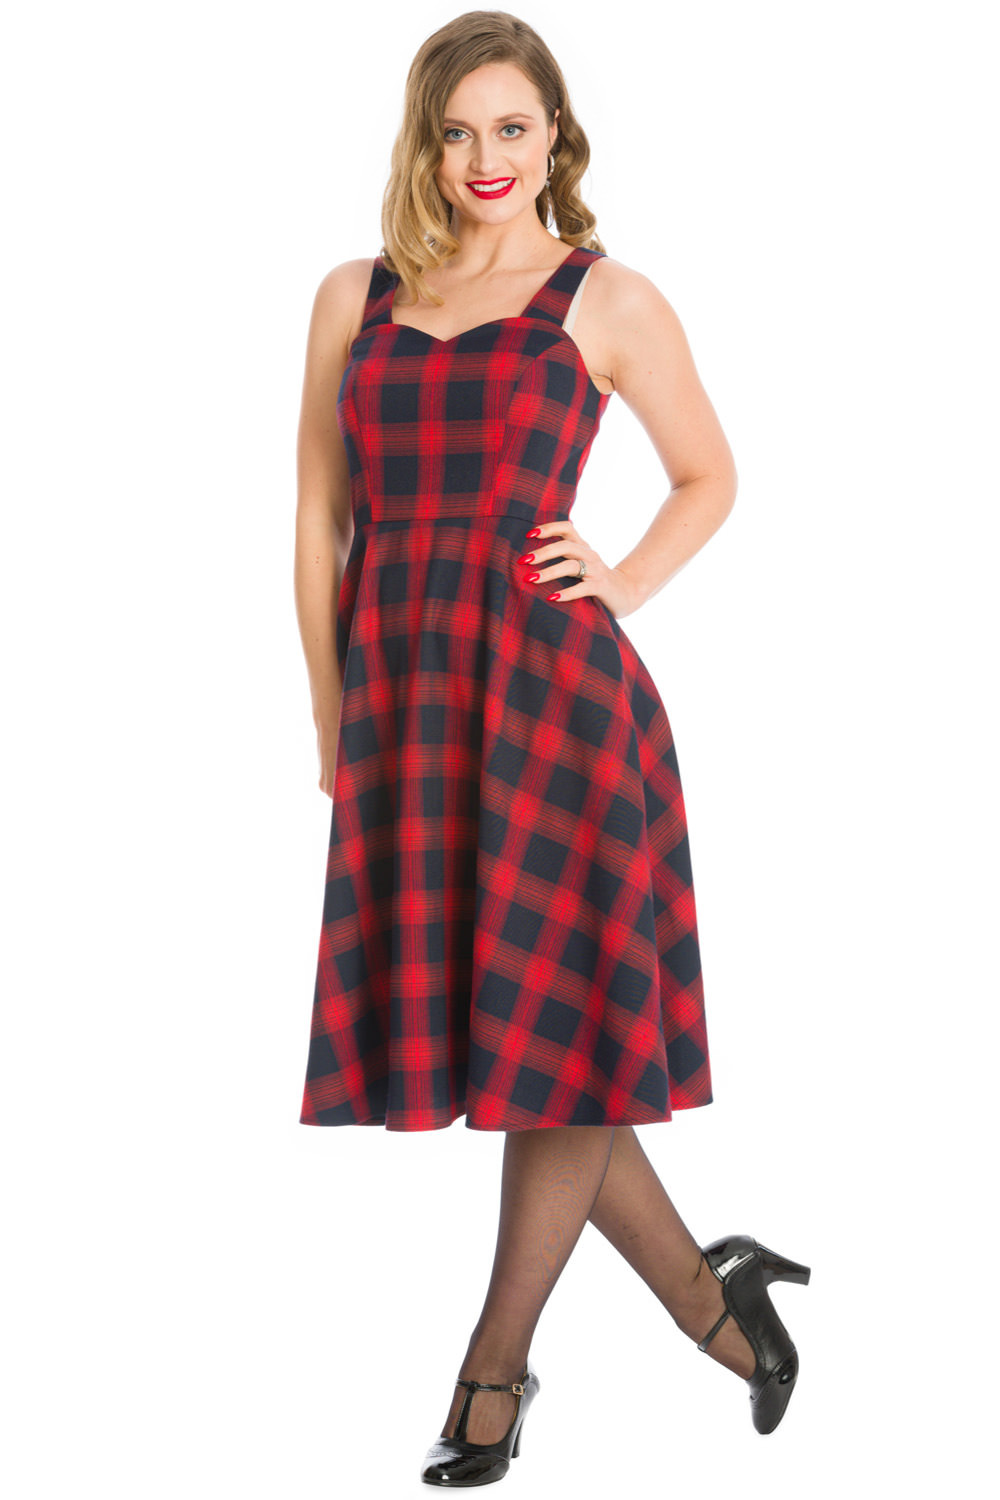 Banned Retro 50s Sweet Check Fit and Flare Swing Dress in Red